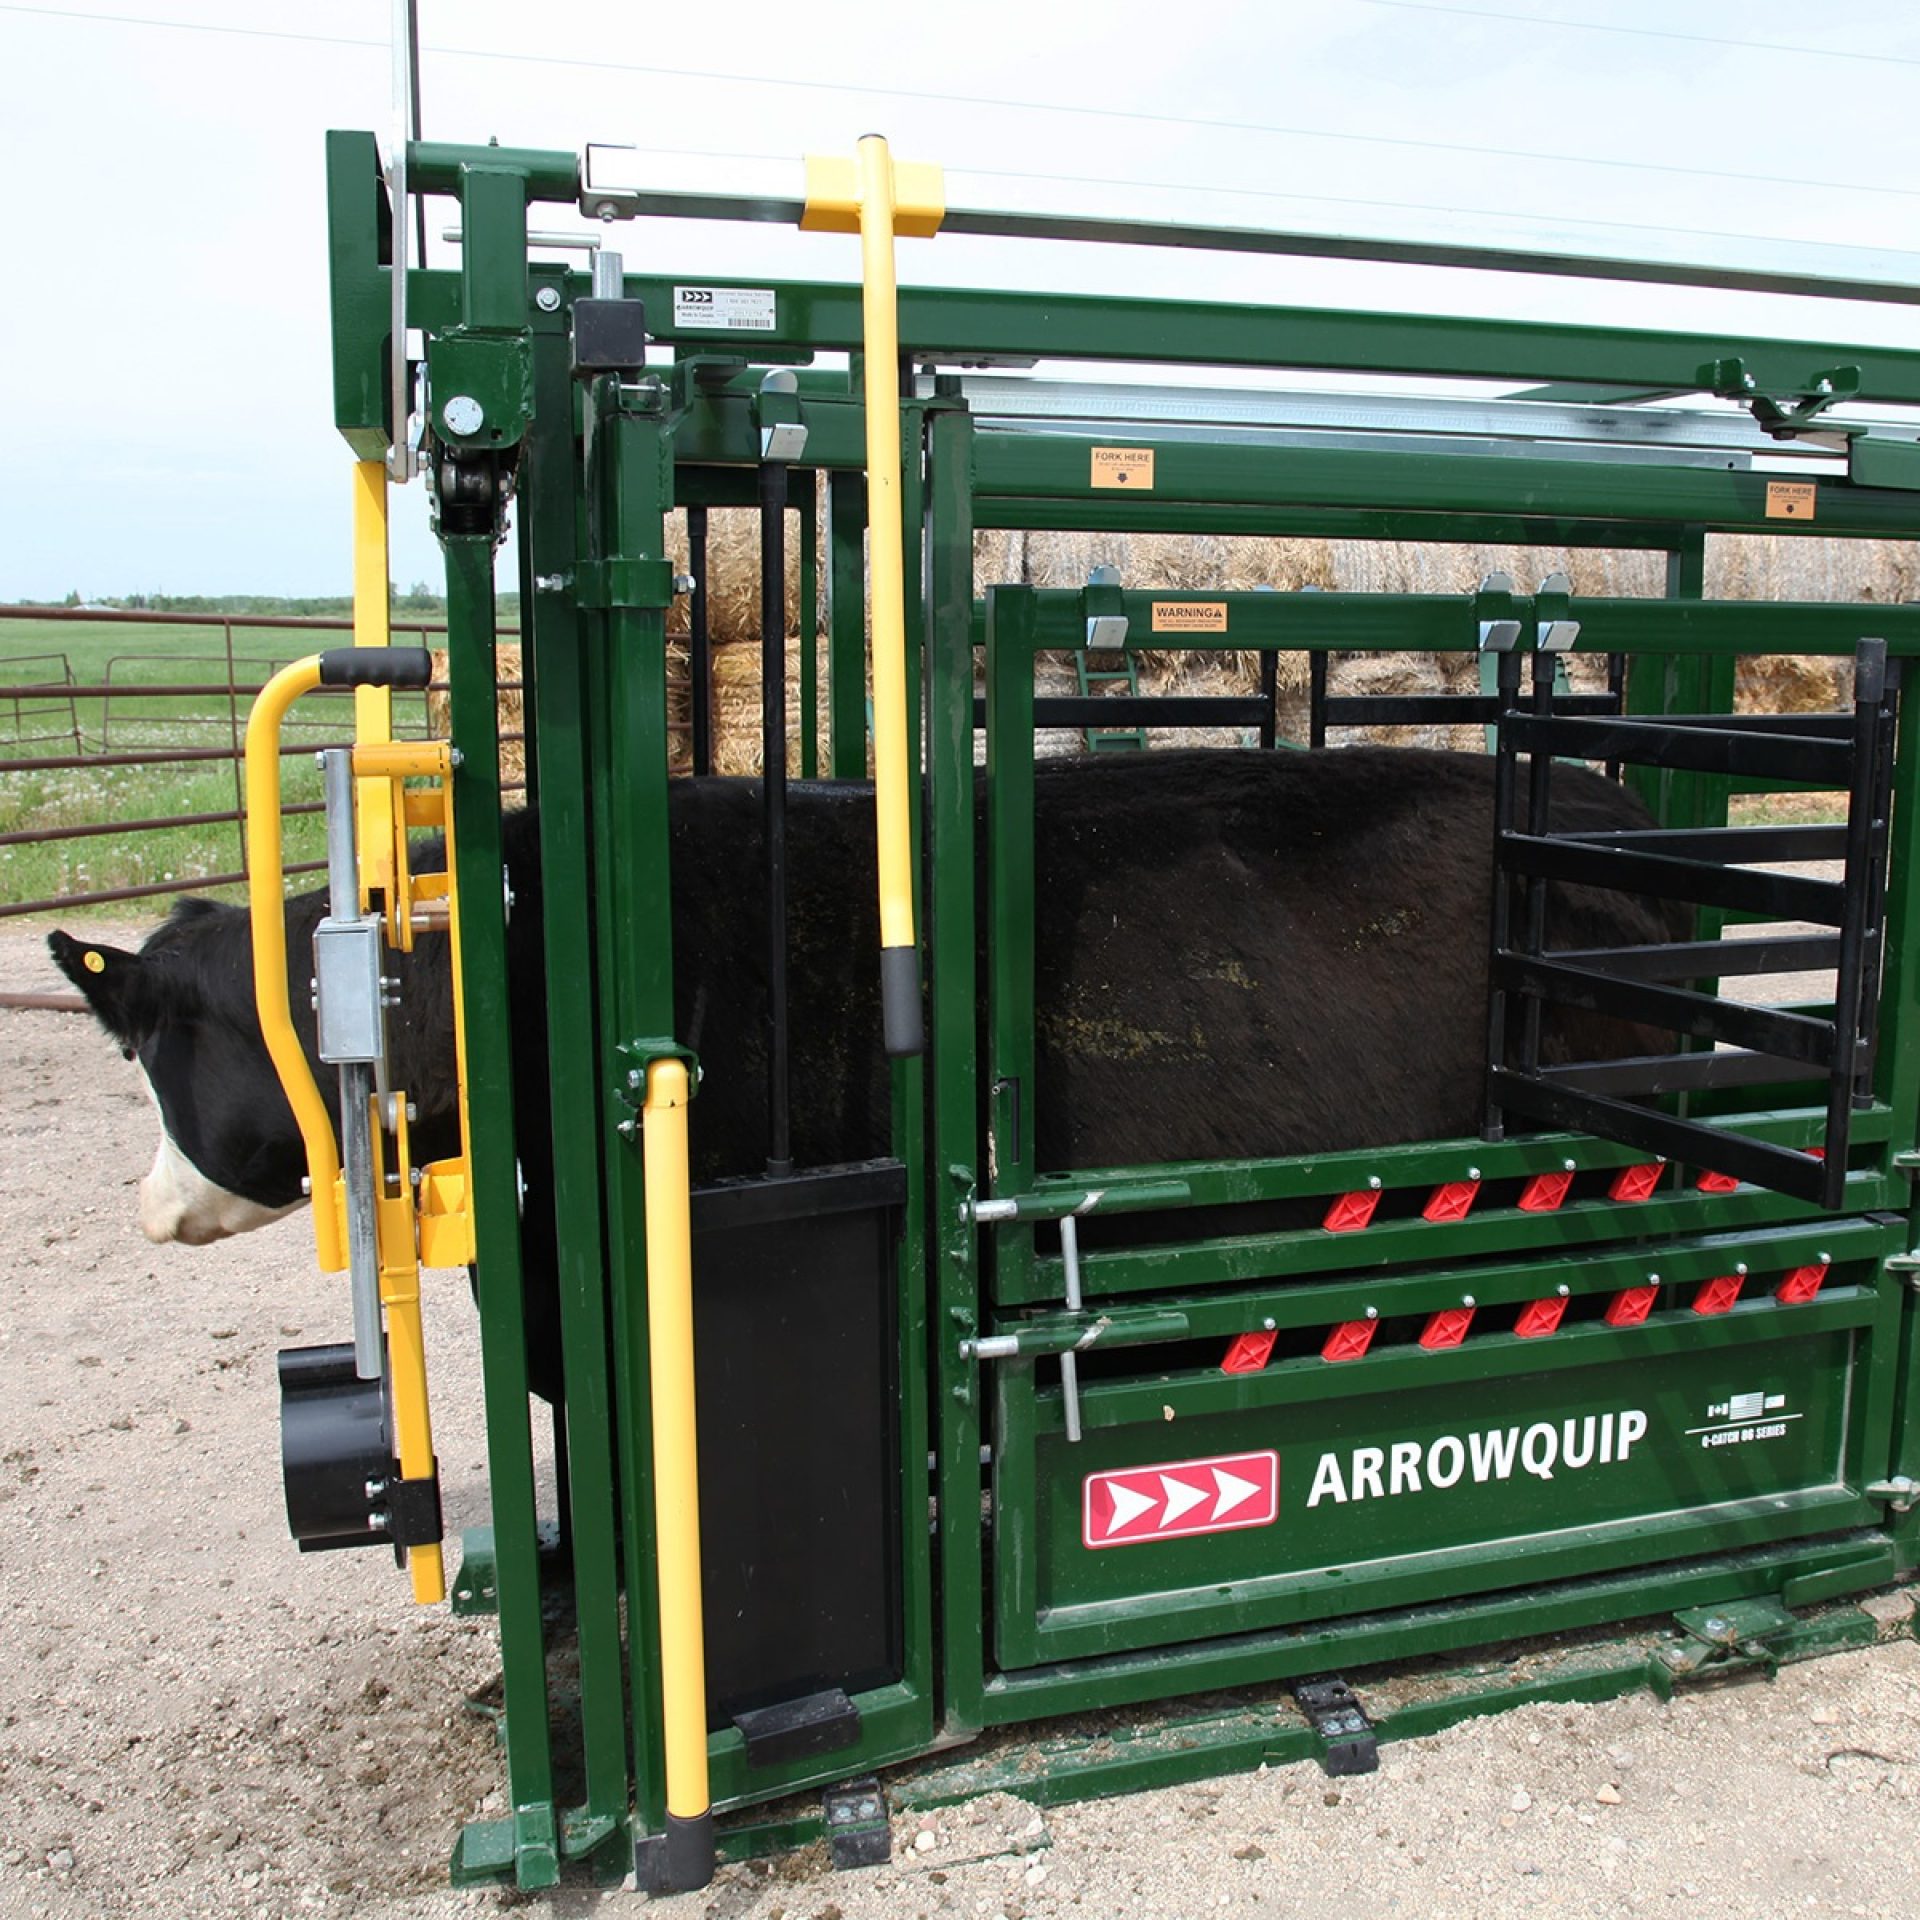 Side view of cow in Arrowquip Q-Catch 86 Series with side access door open